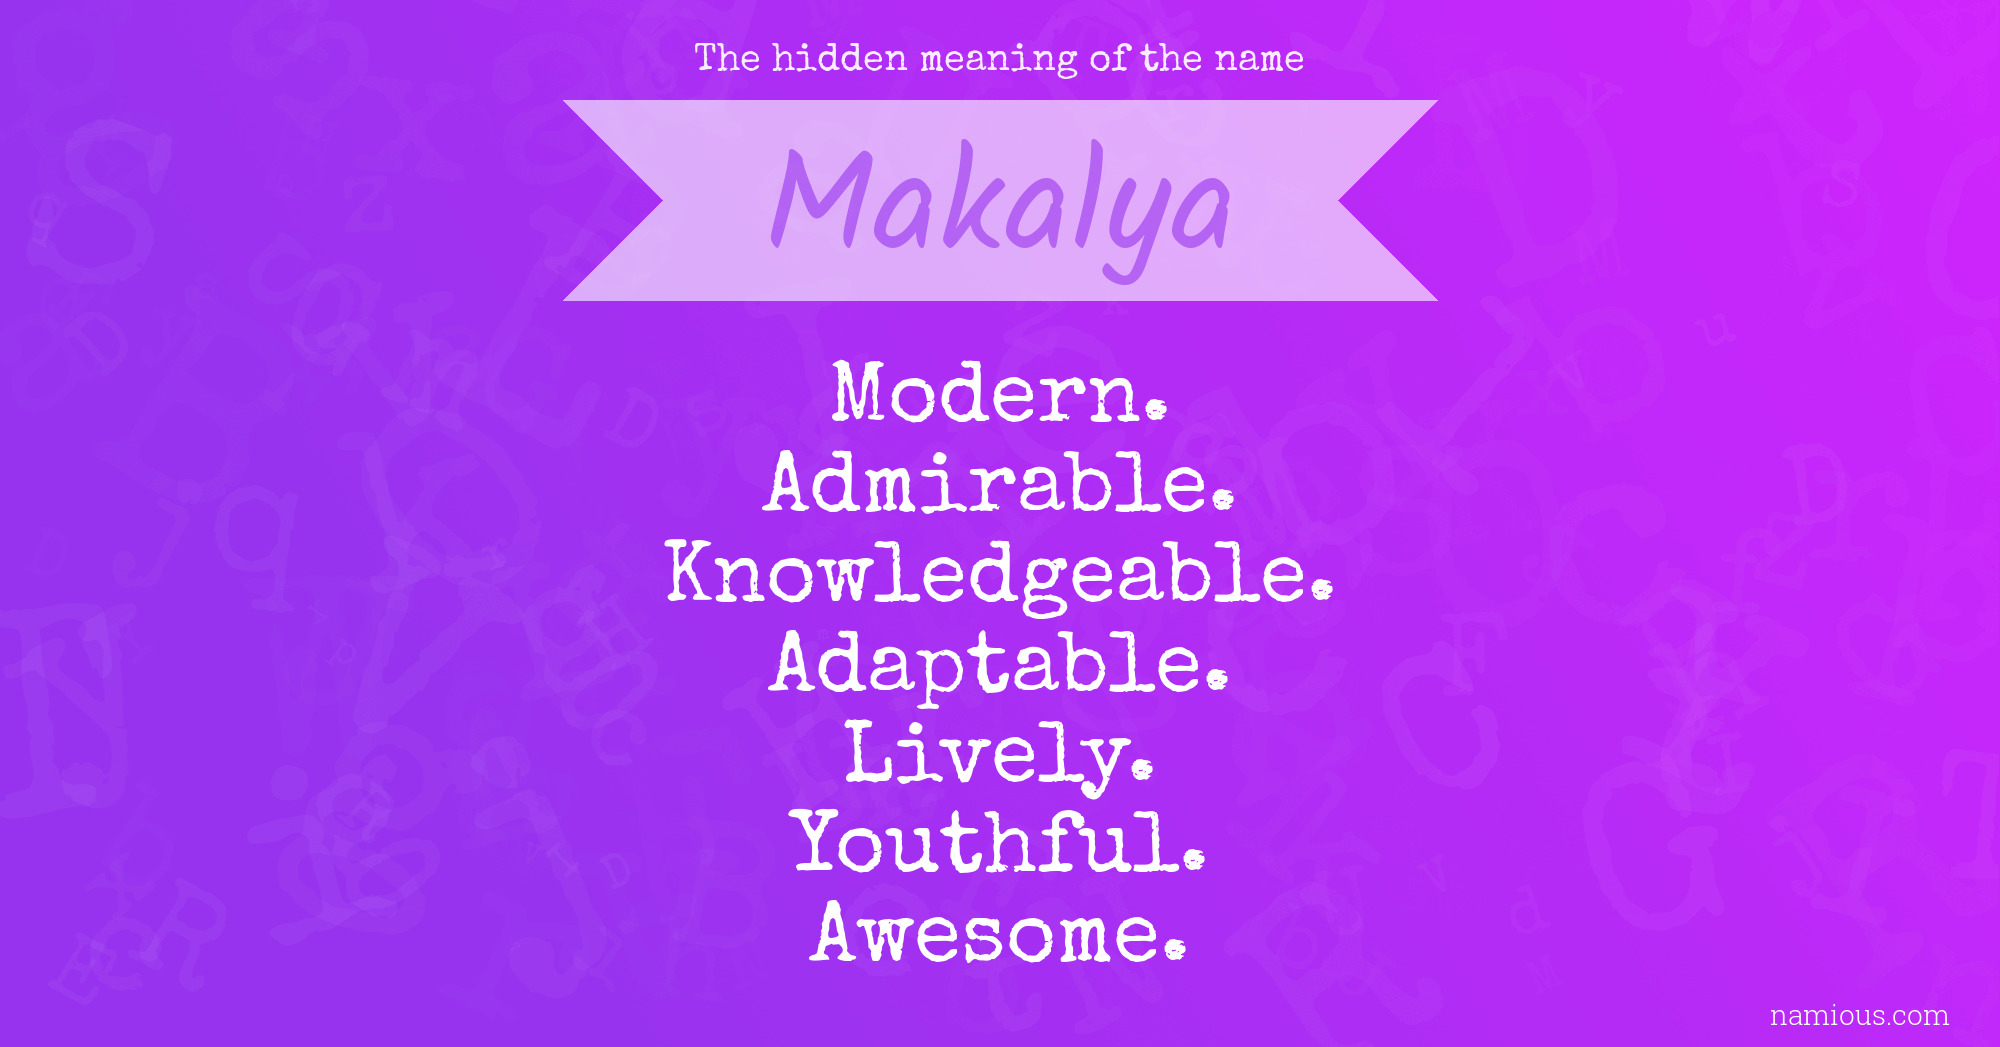 The hidden meaning of the name Makalya